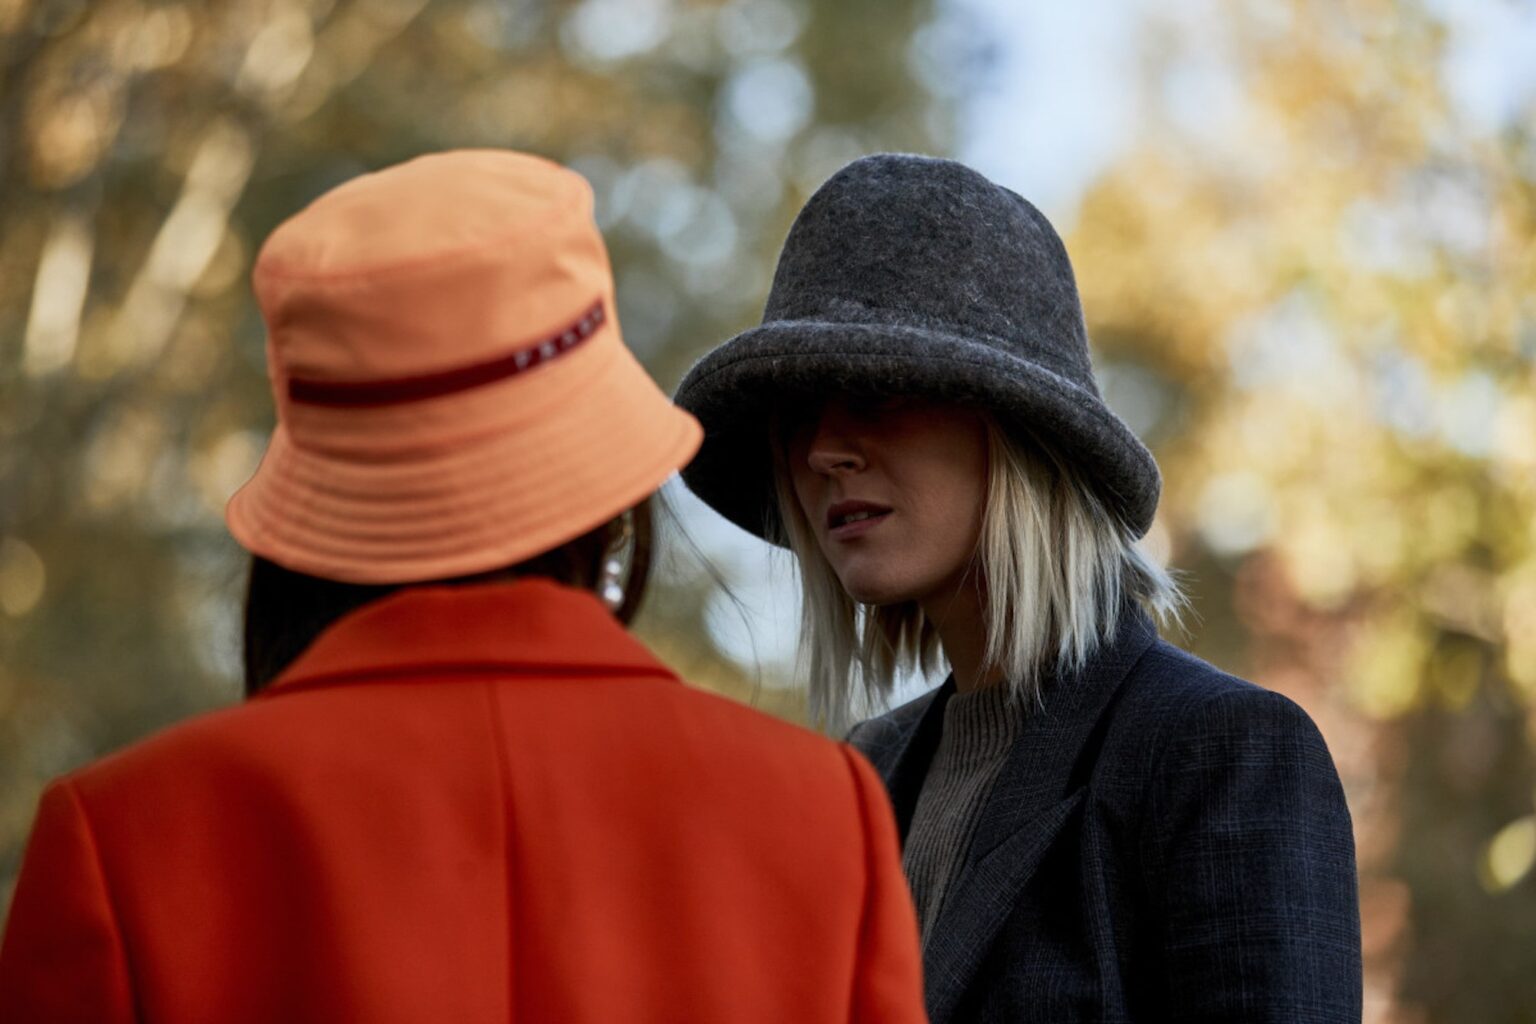 Bought a new hat but not sure how to wear it? Check out our guide to styling hats so you can avoid a disastrous fashion blunder!